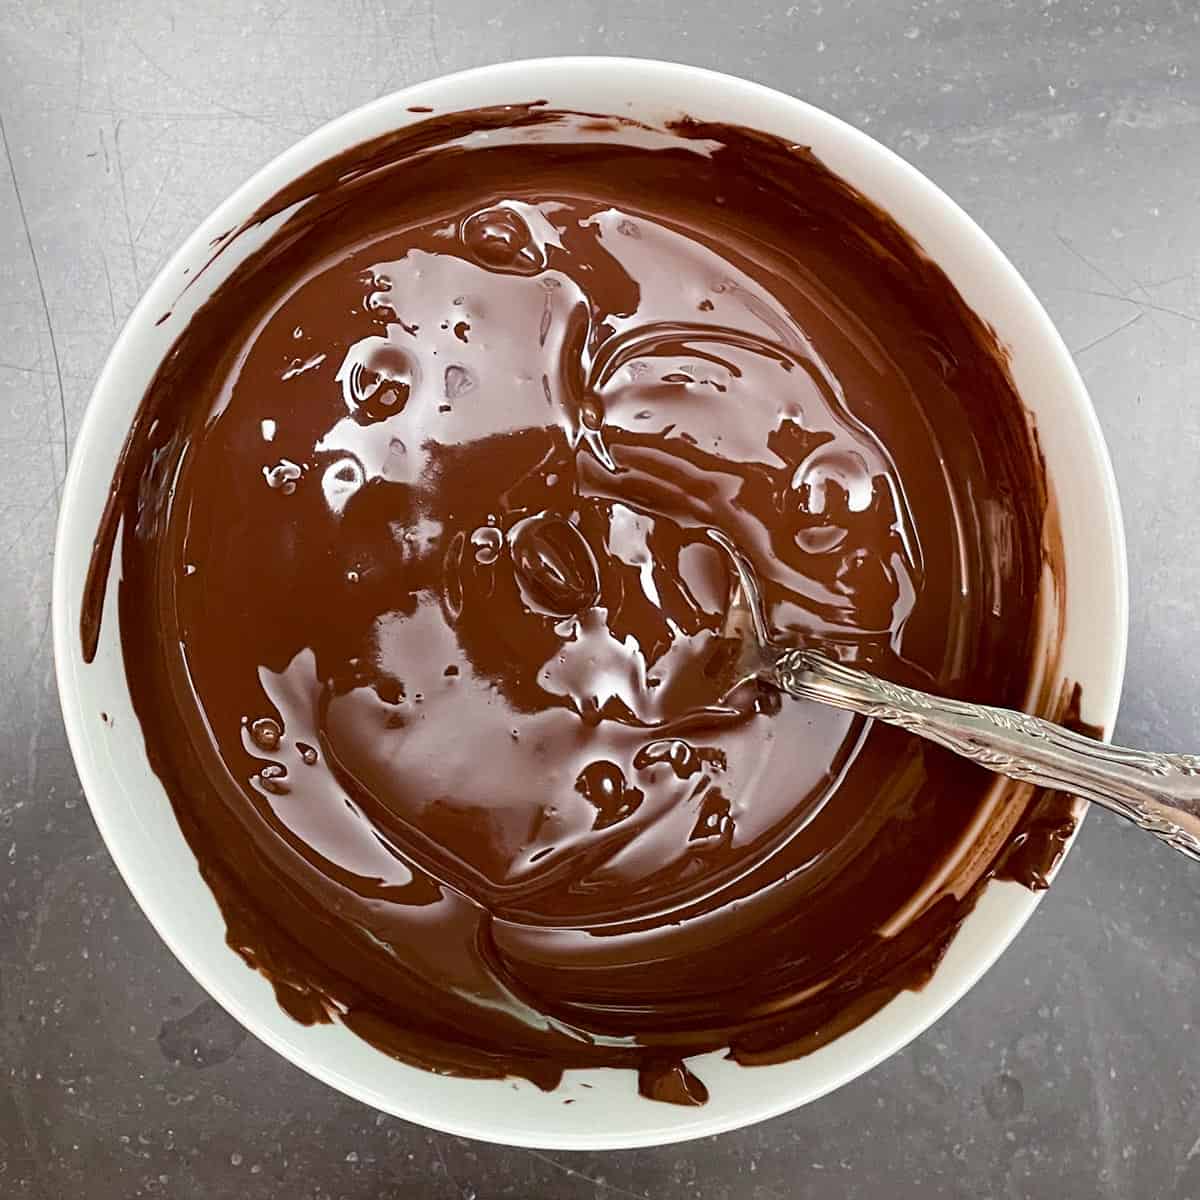 Melted dark chocolate in a white bowl.